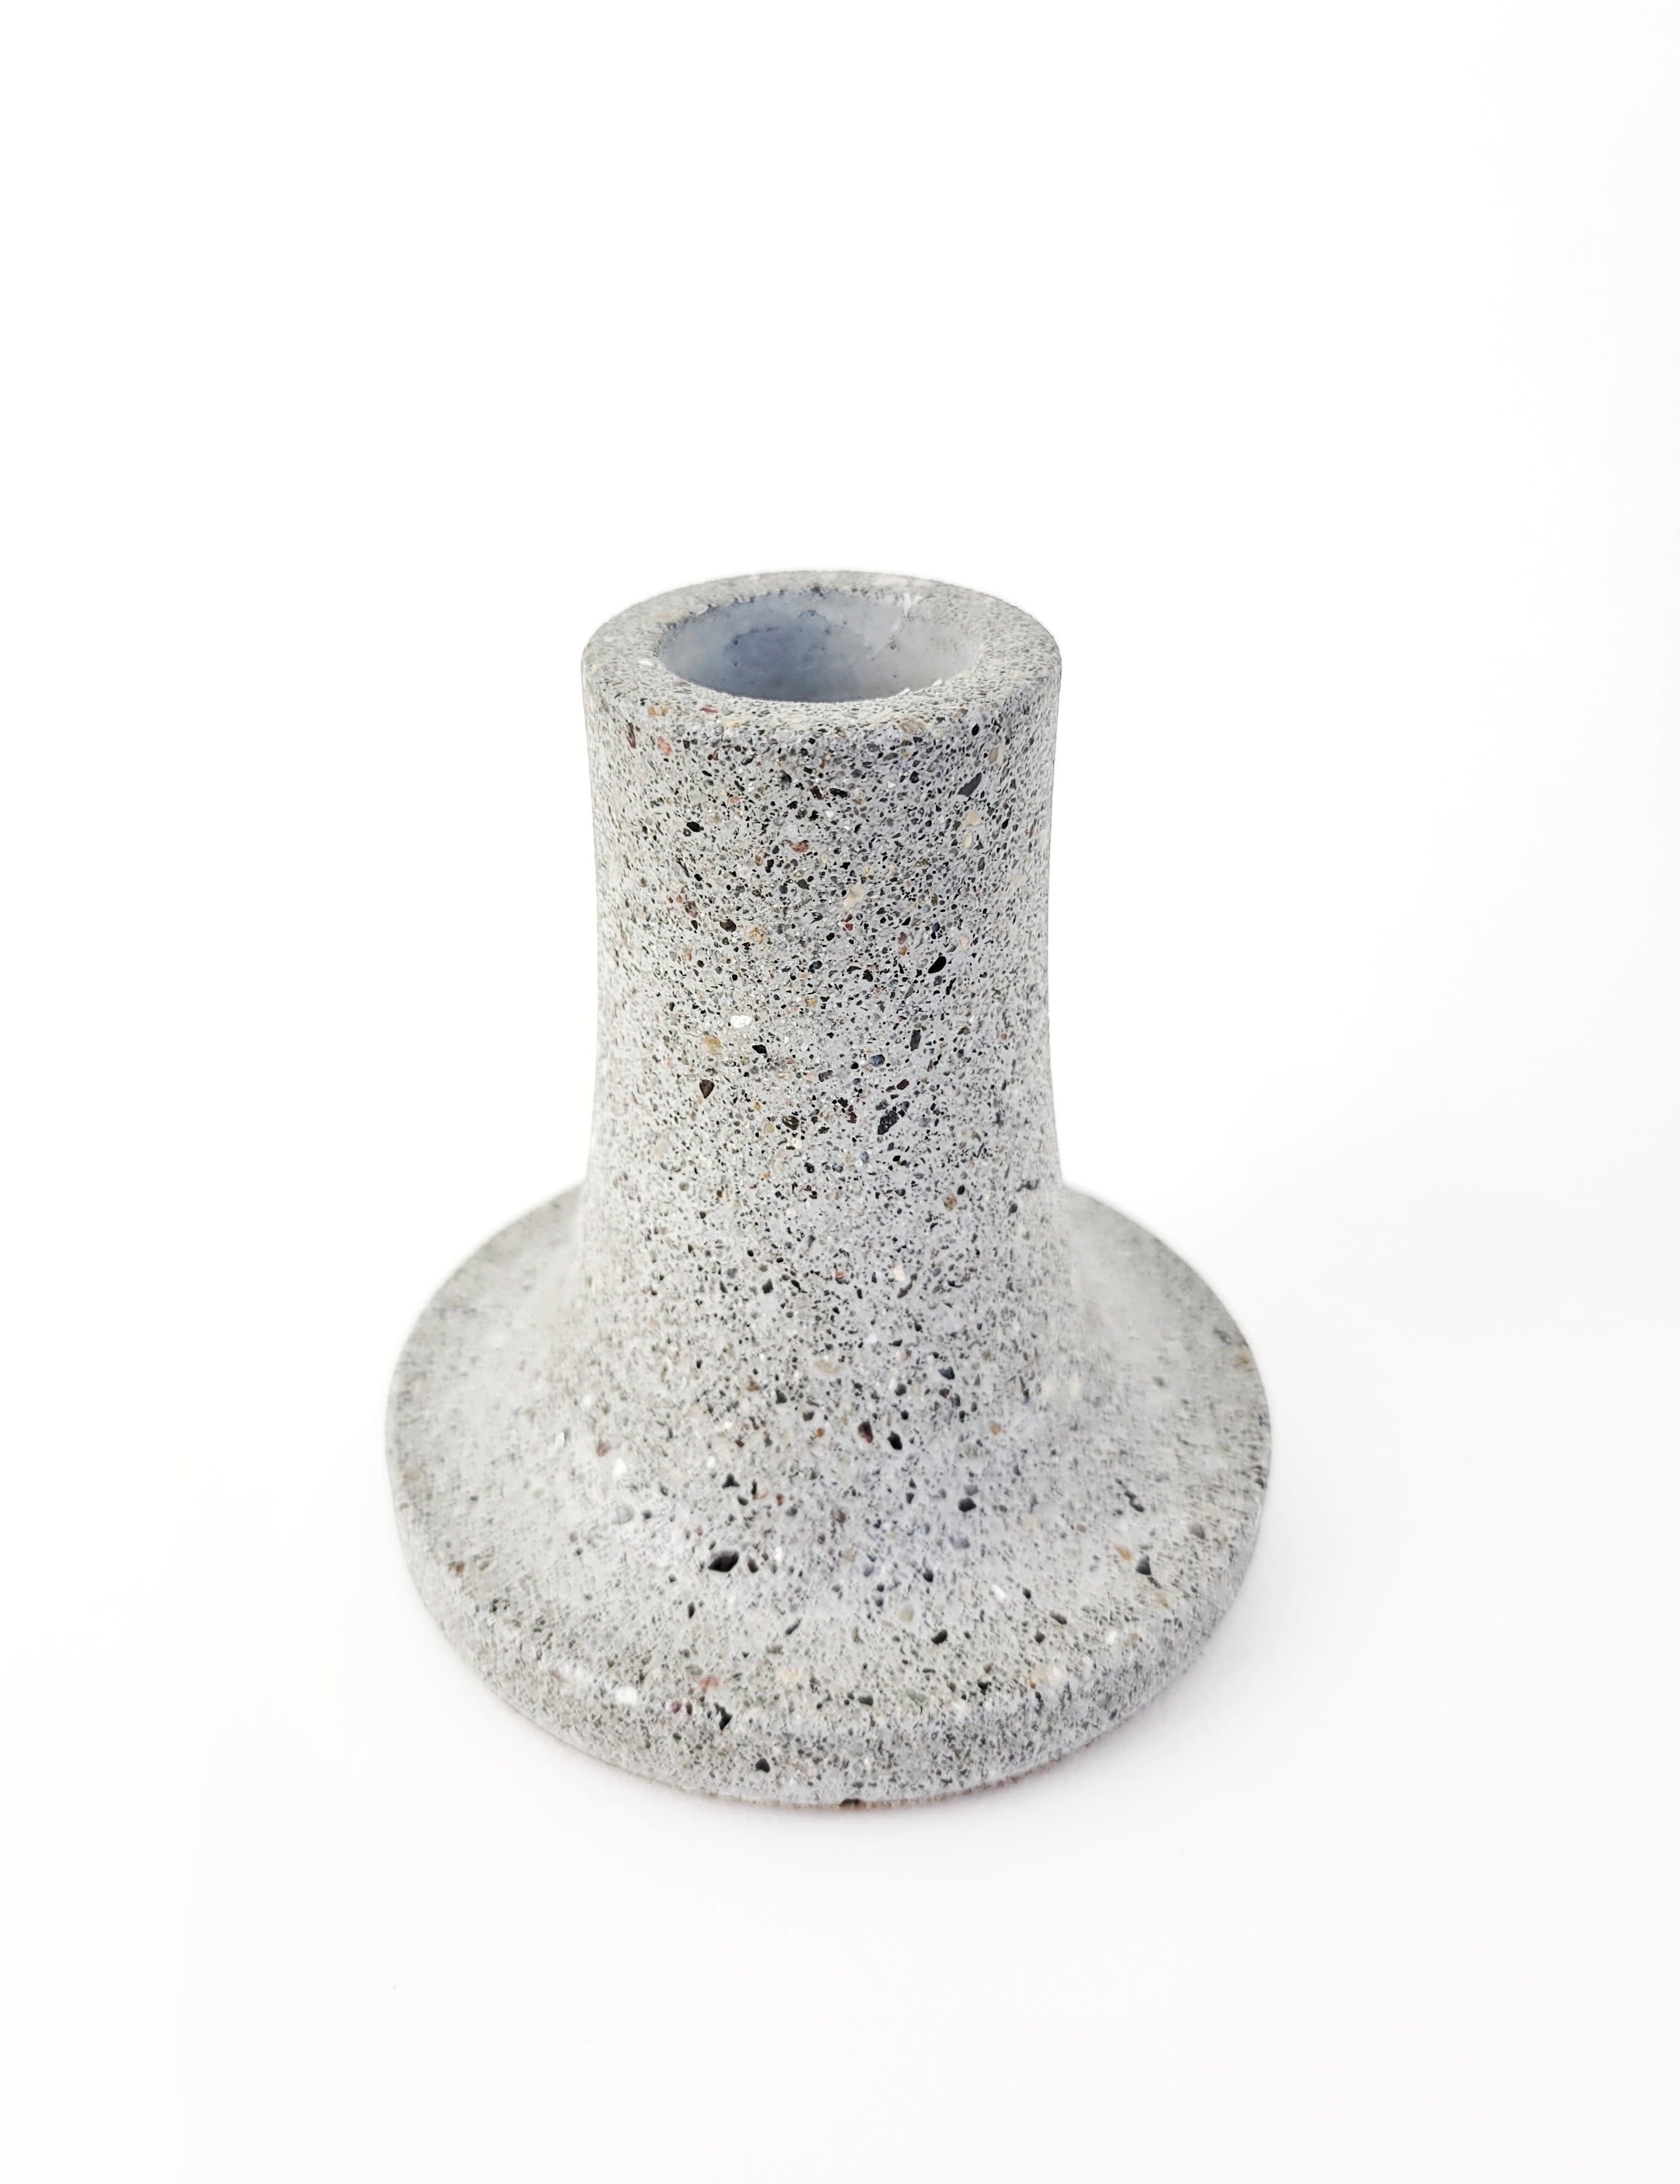 Grey Tall Taper Candle Holder - Elegant Stone Home Decor Accessory against a White Background